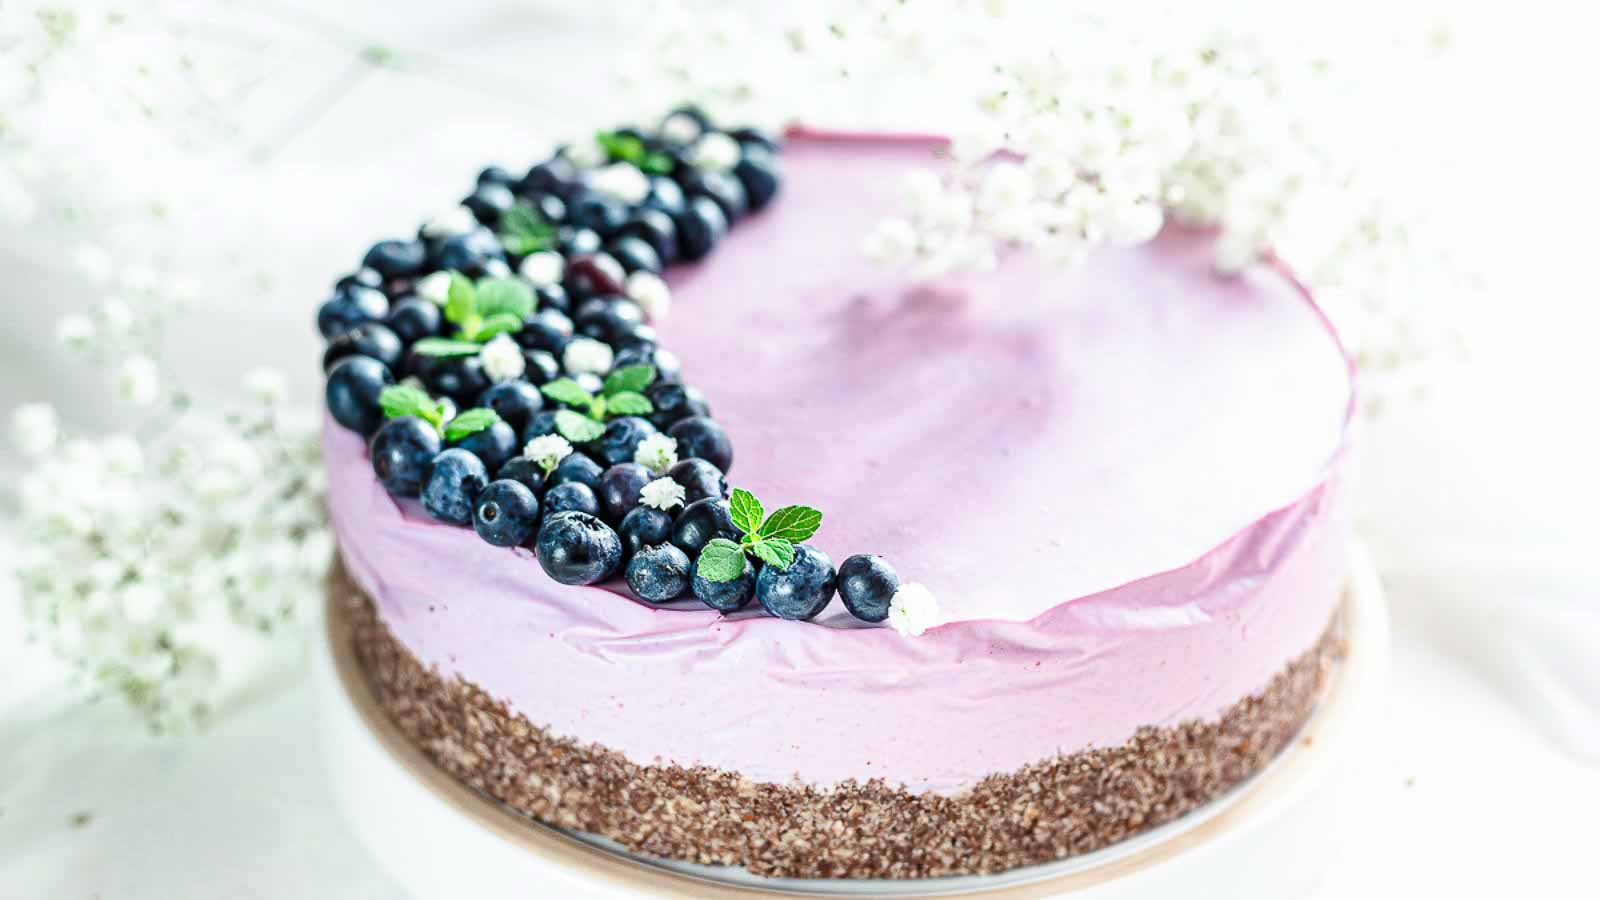 A pink cake with blueberries on top.